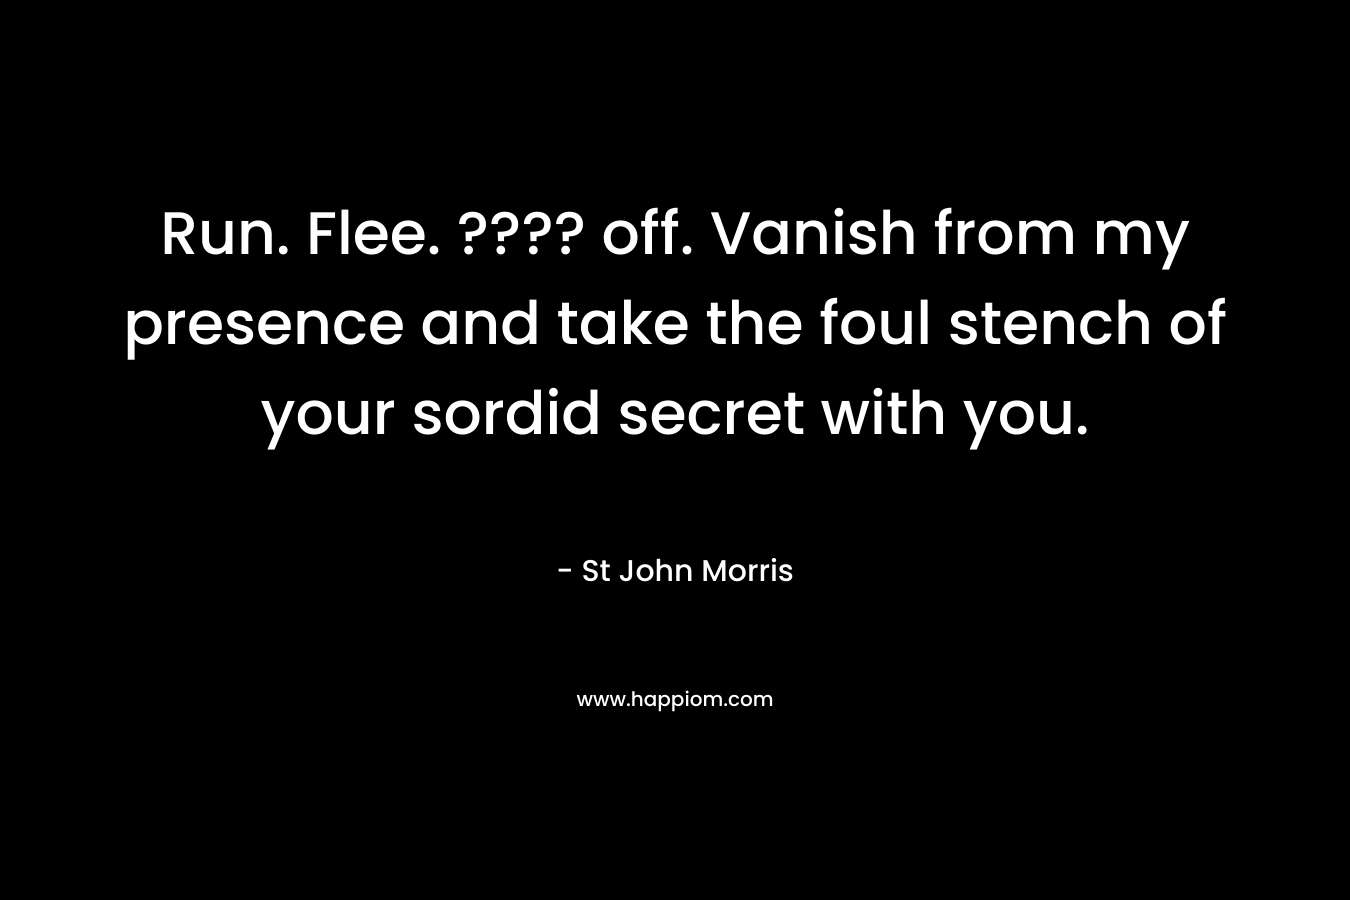 Run. Flee. ???? off. Vanish from my presence and take the foul stench of your sordid secret with you.